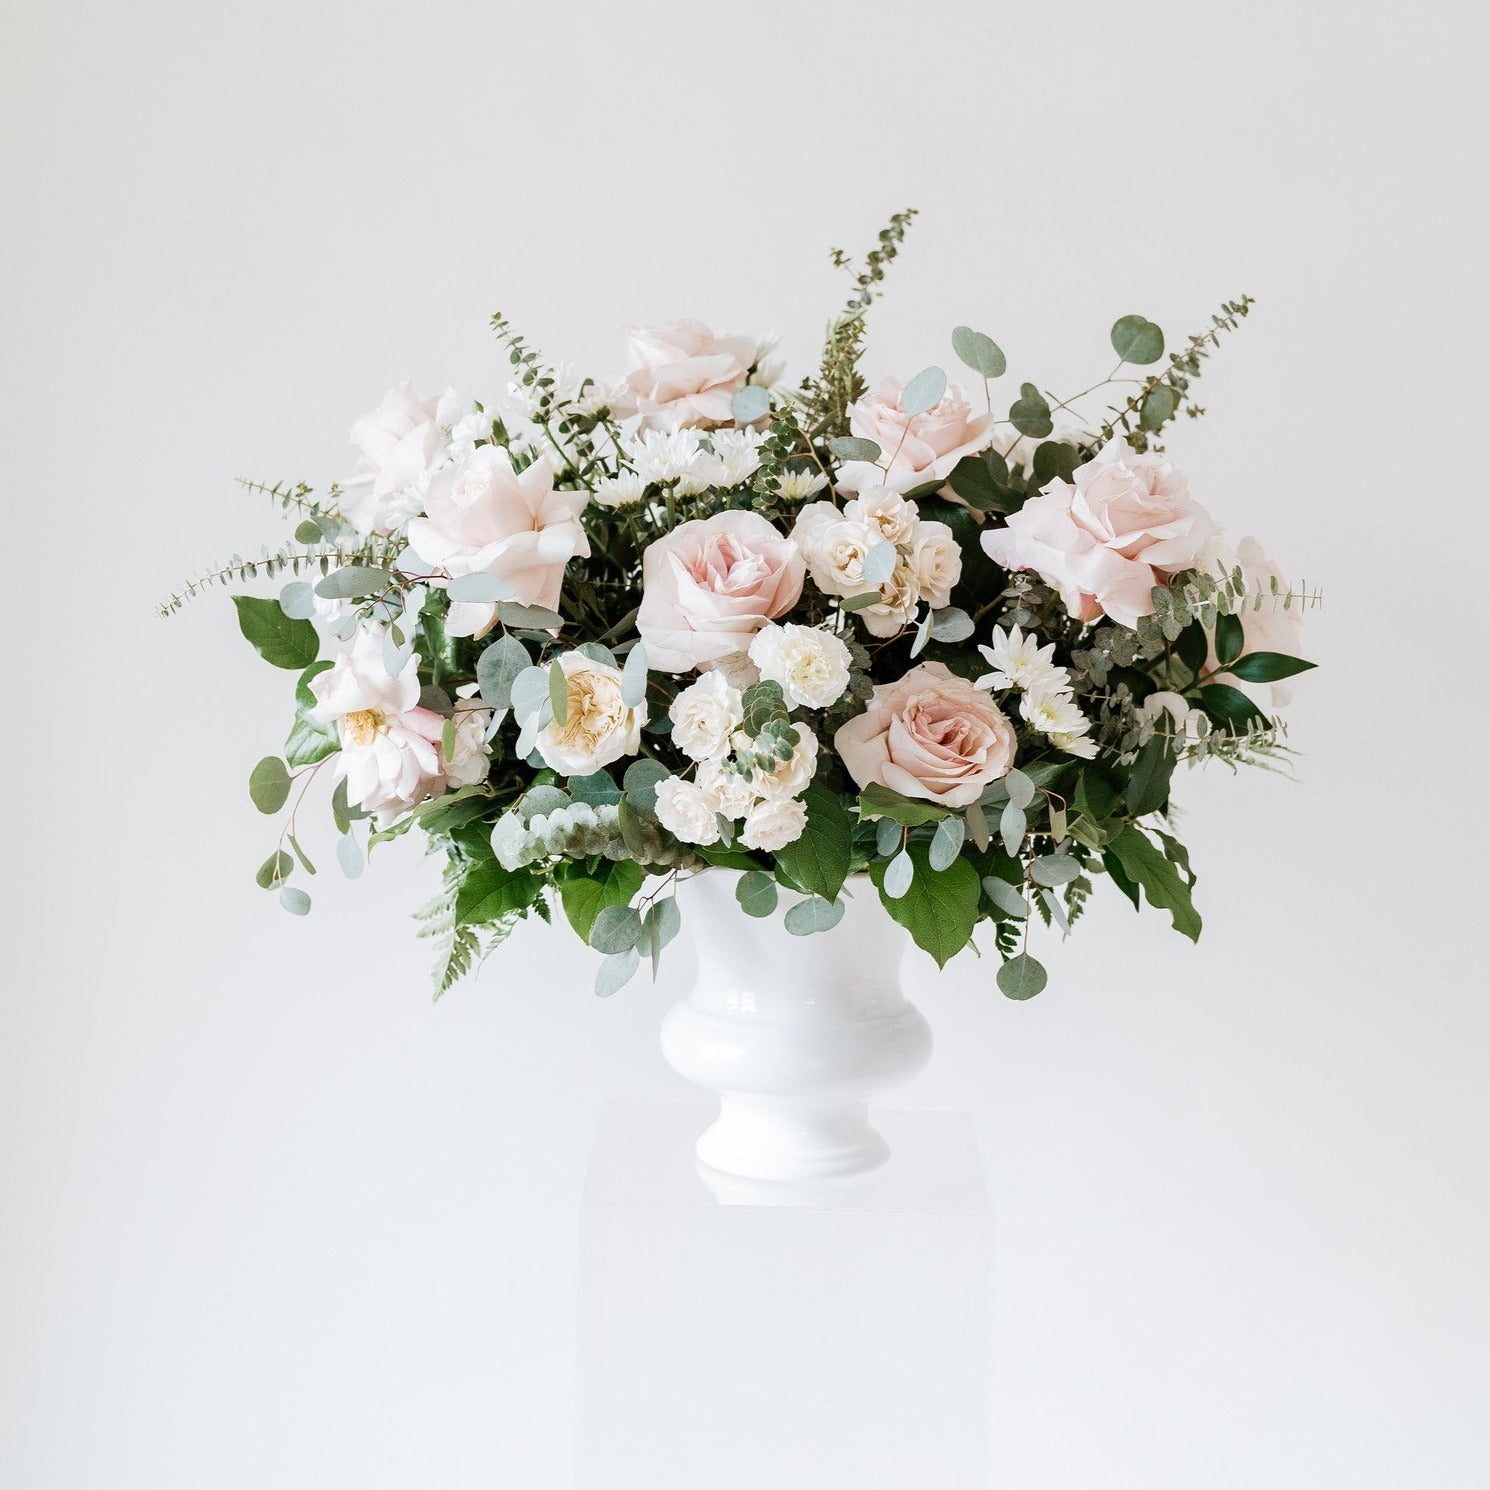 Dusty Rose and Cream Ceremony Wedding Flowers with Quicksand Roses by Flower Moxie